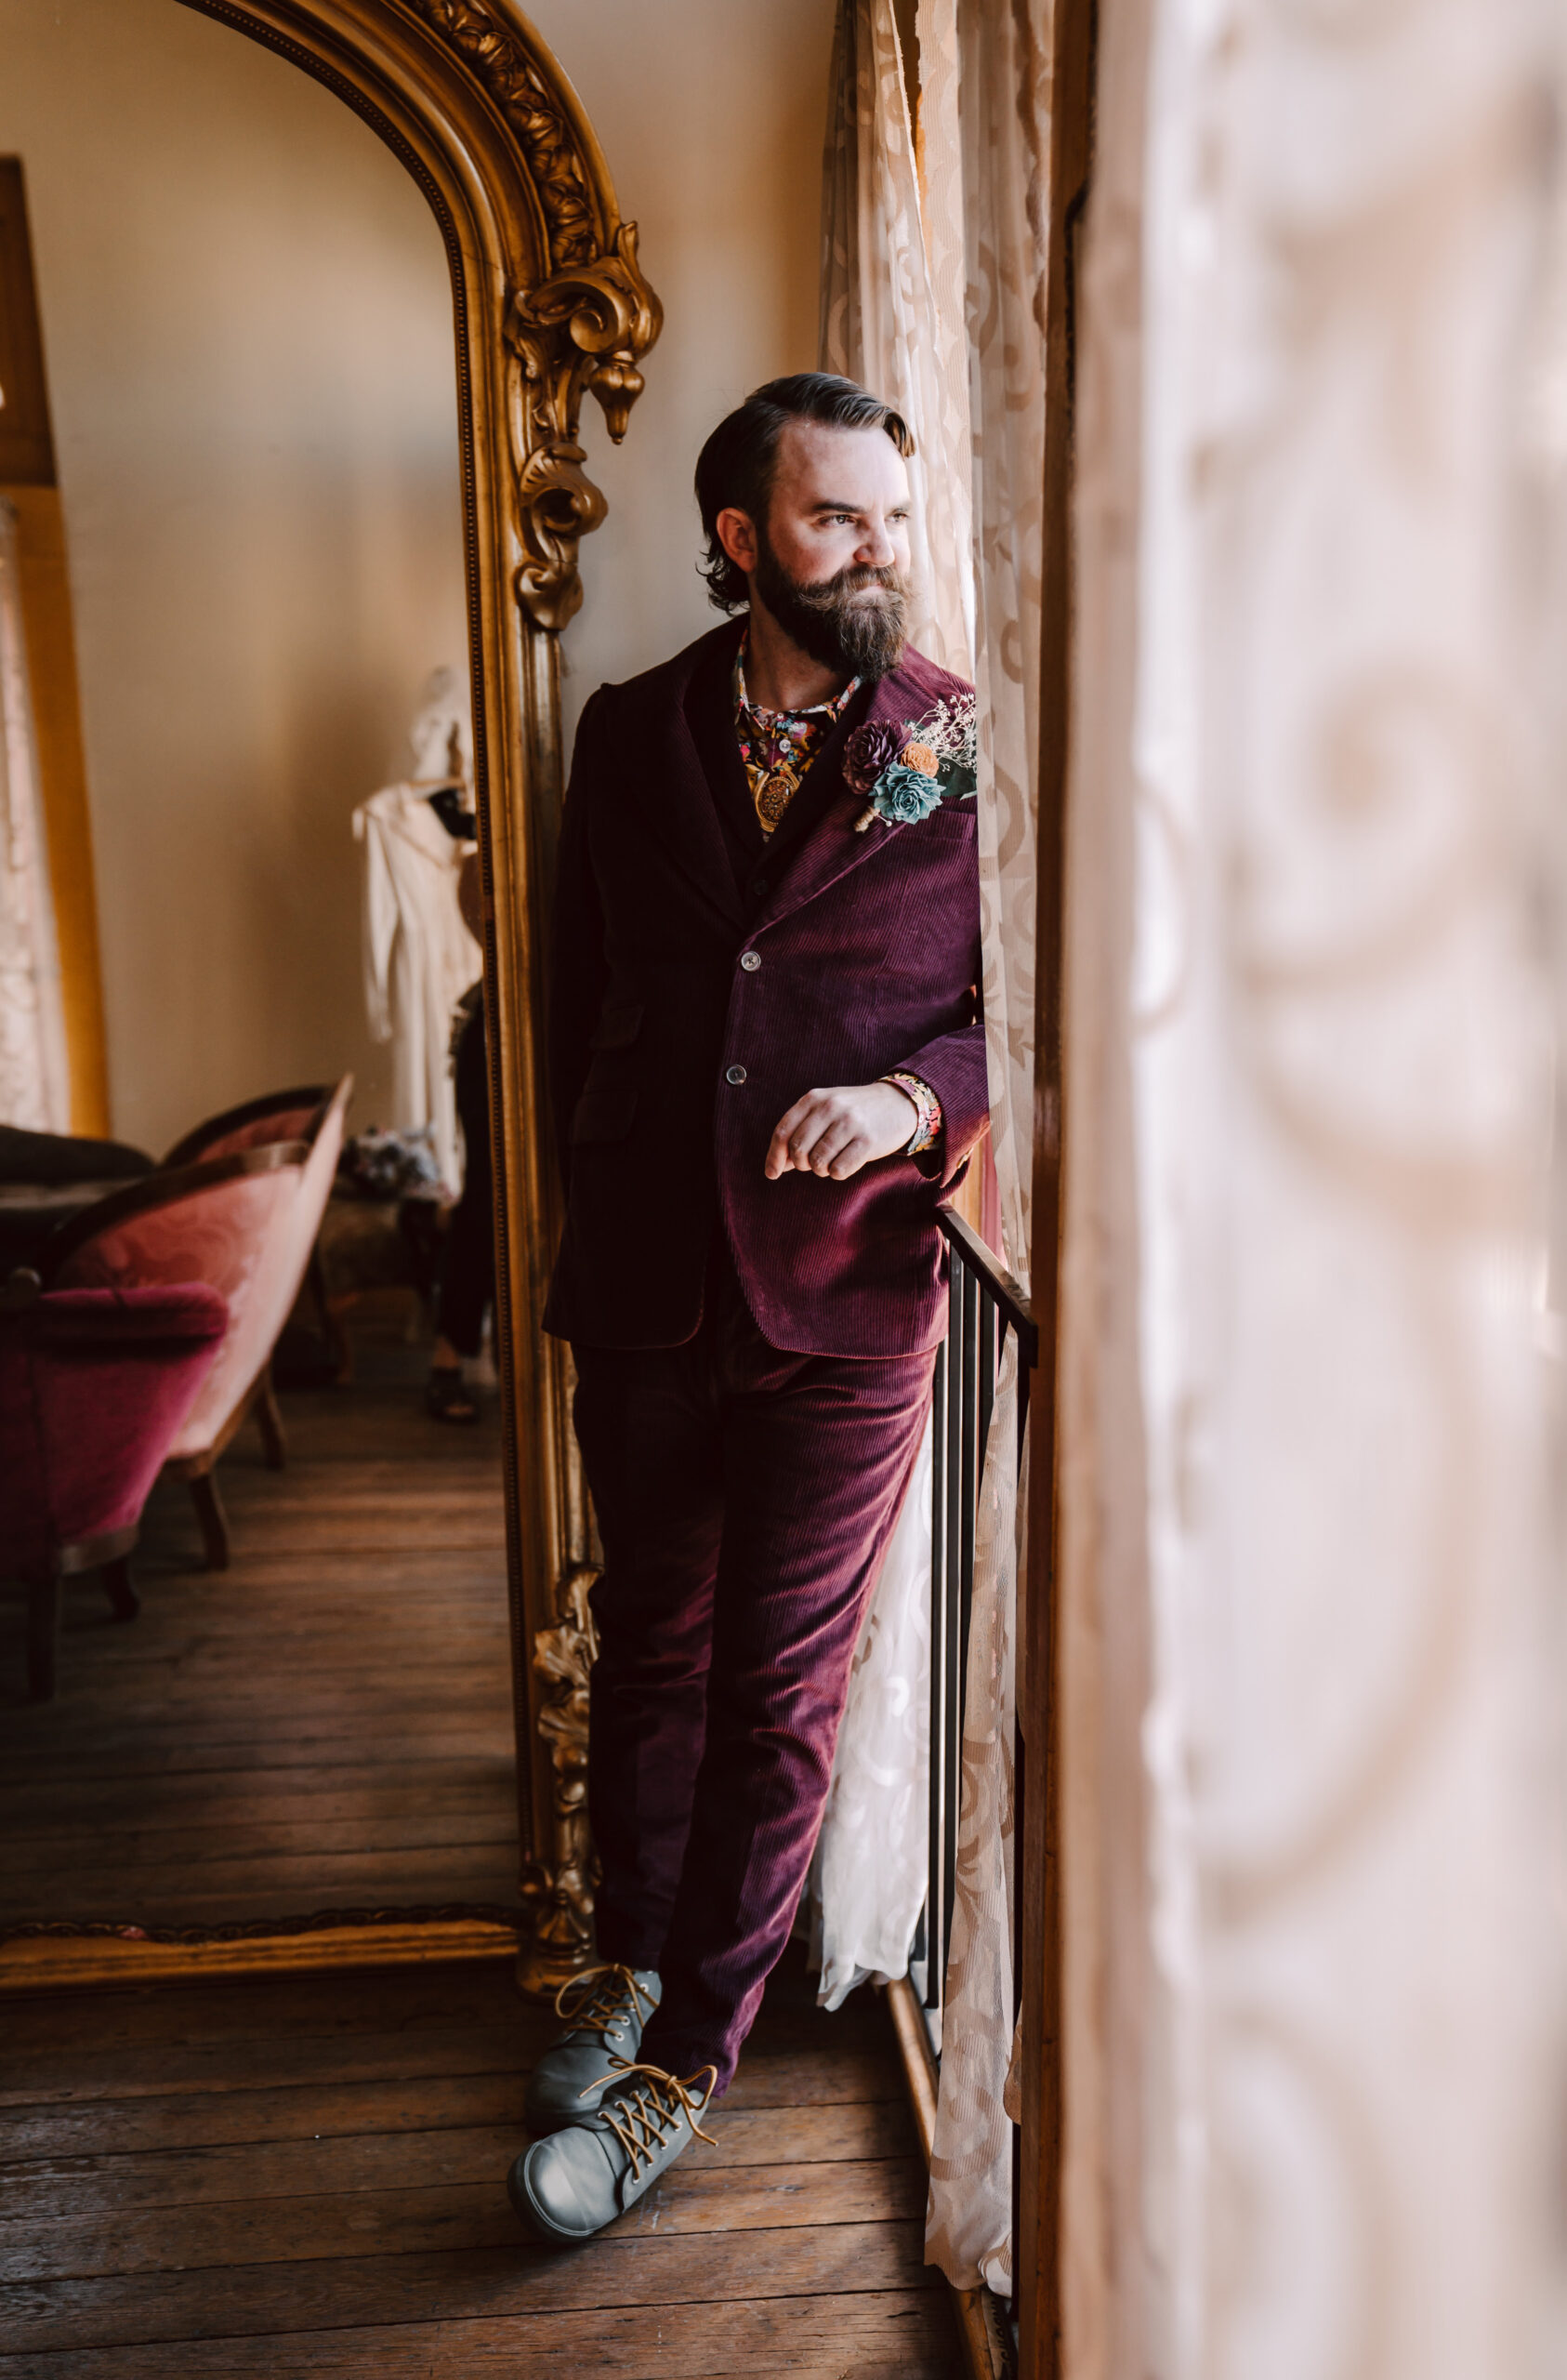 A groom wearing a deep red corduroy tux with floral tie looking out the window